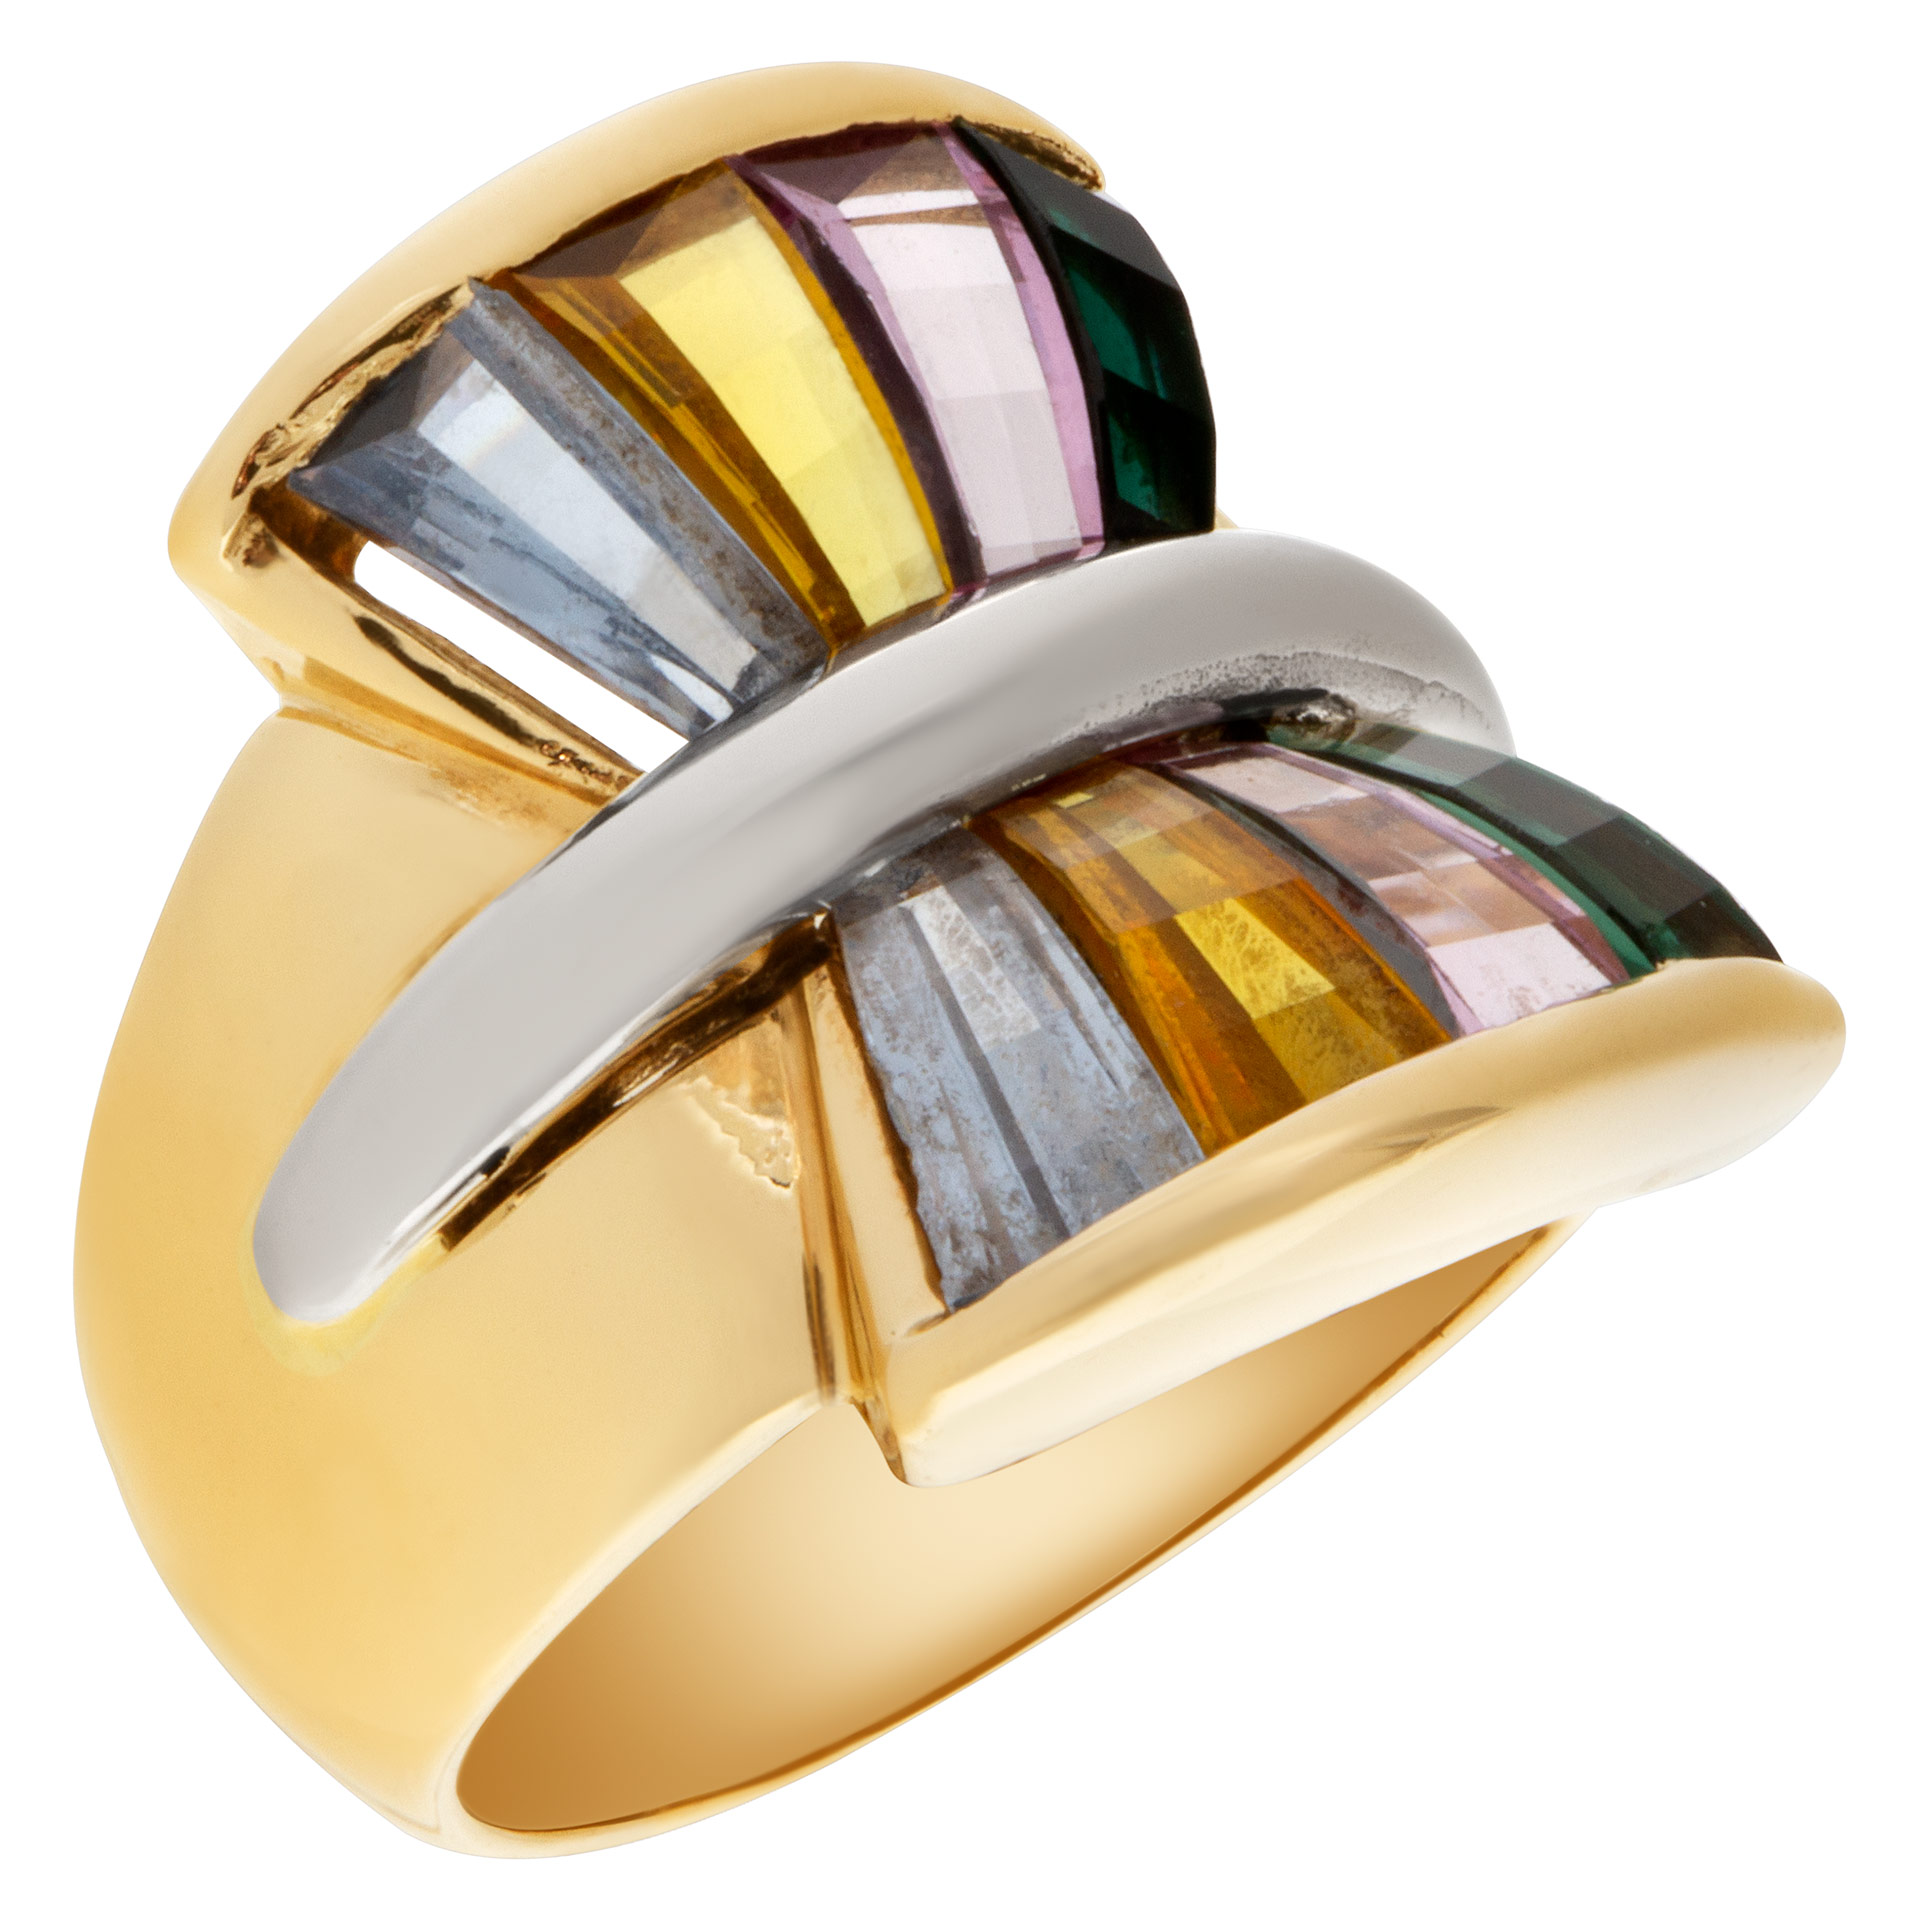 "Colorful Fan" tapered baguette cut colorful semi-precious stone ring in 14k image 3